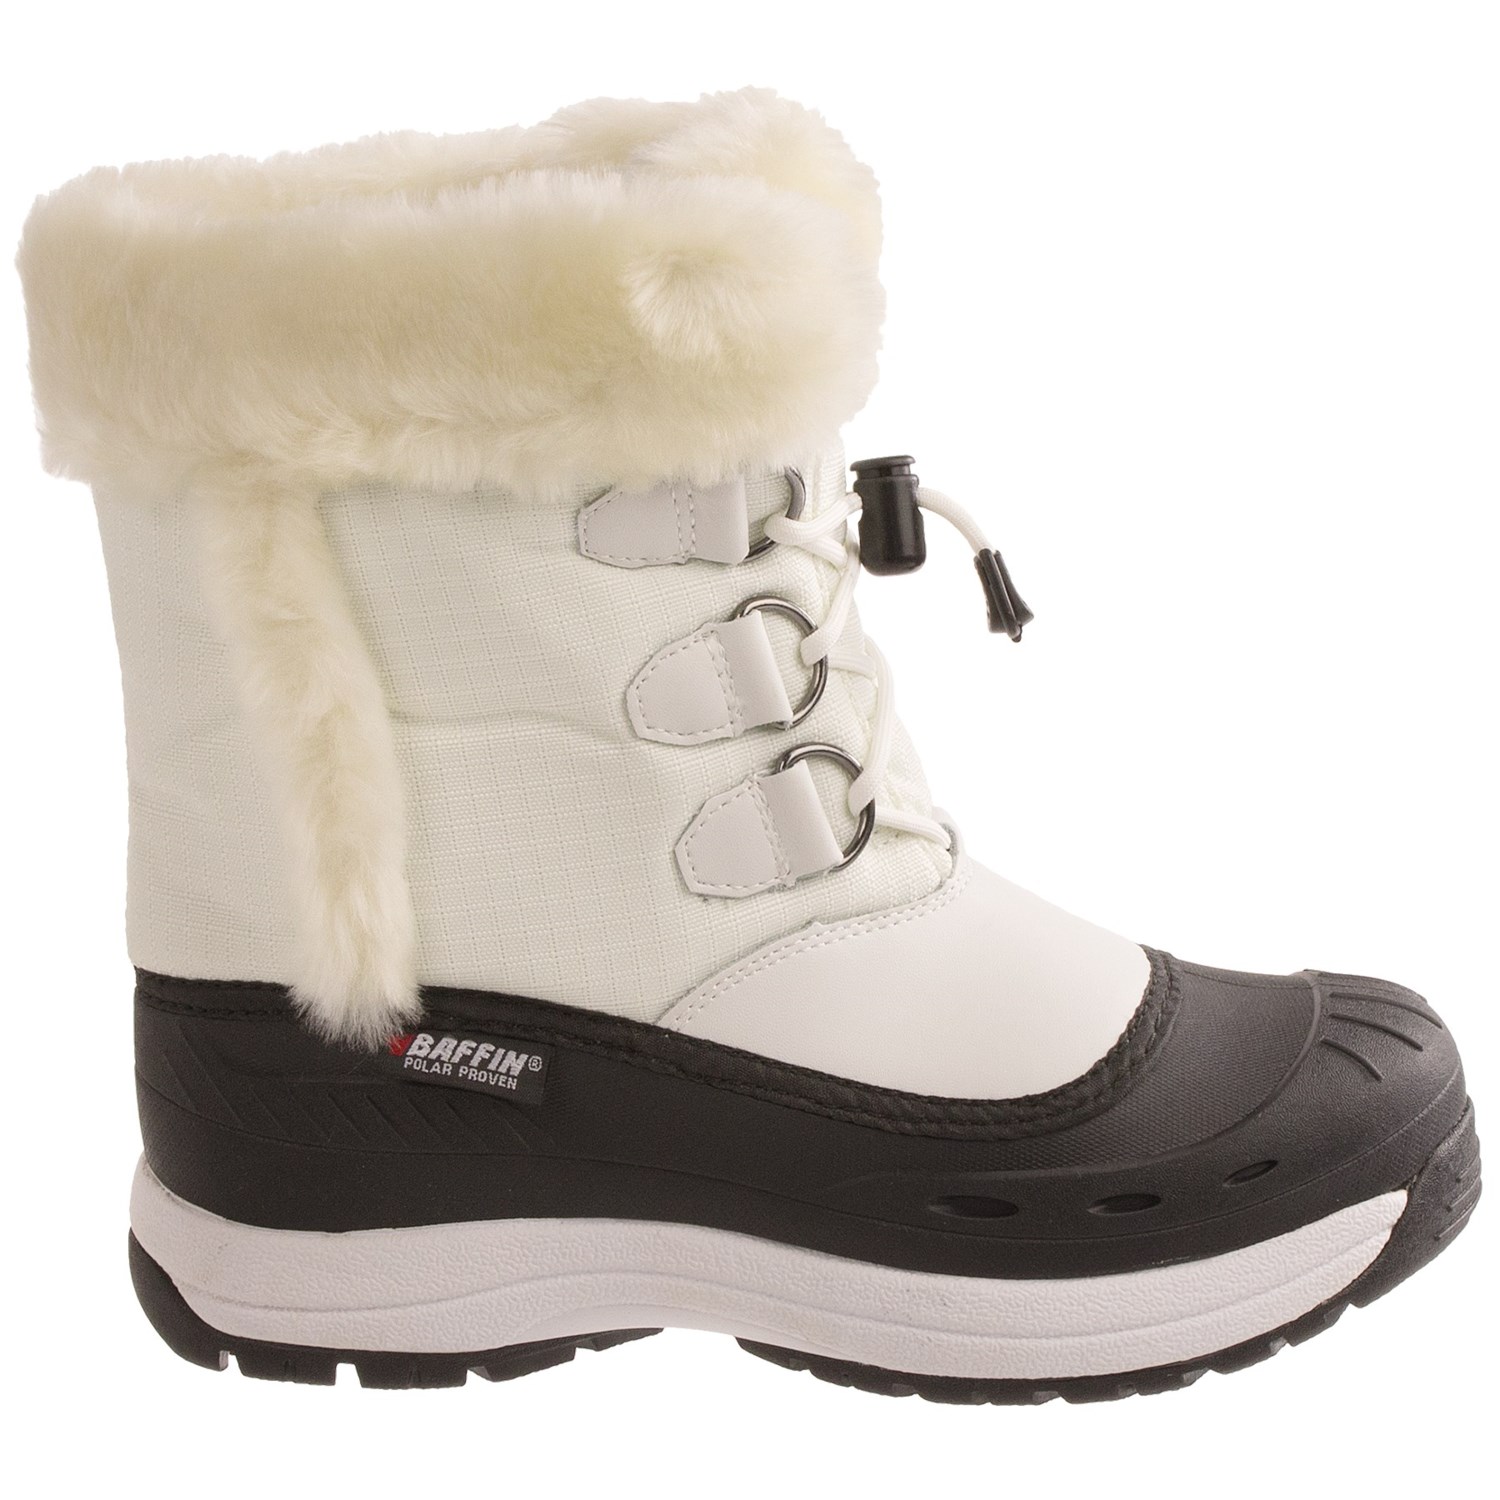 Baffin Snobunny Snow Boots (For Women) - Save 76%